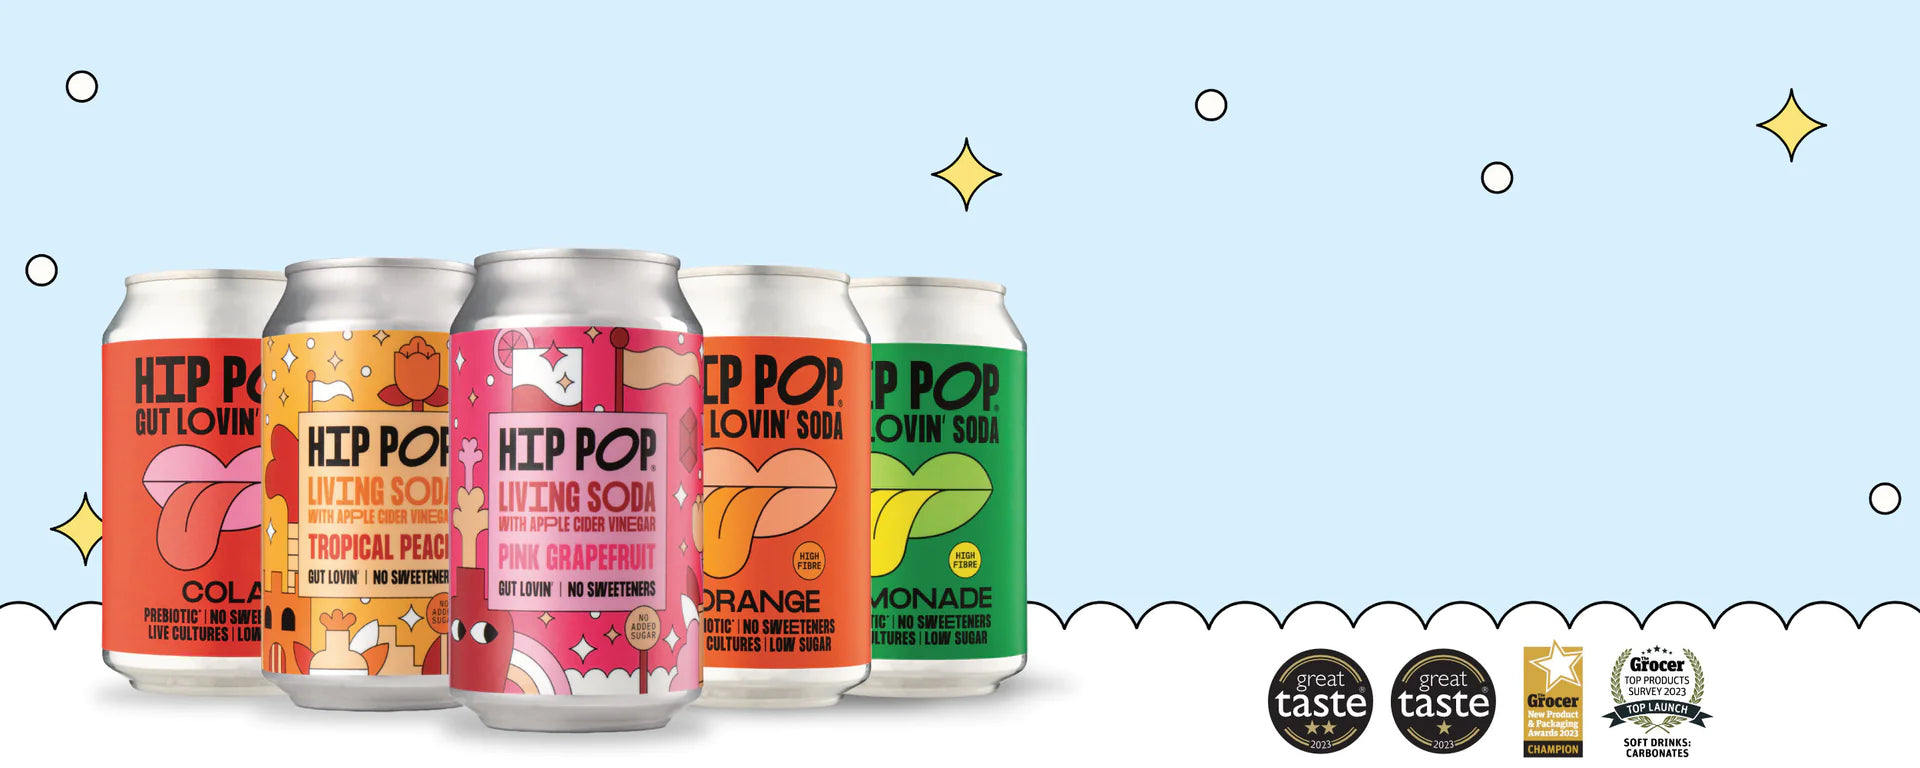 Hip Pop Living Soda Flavour Range at Functional Drinks Club